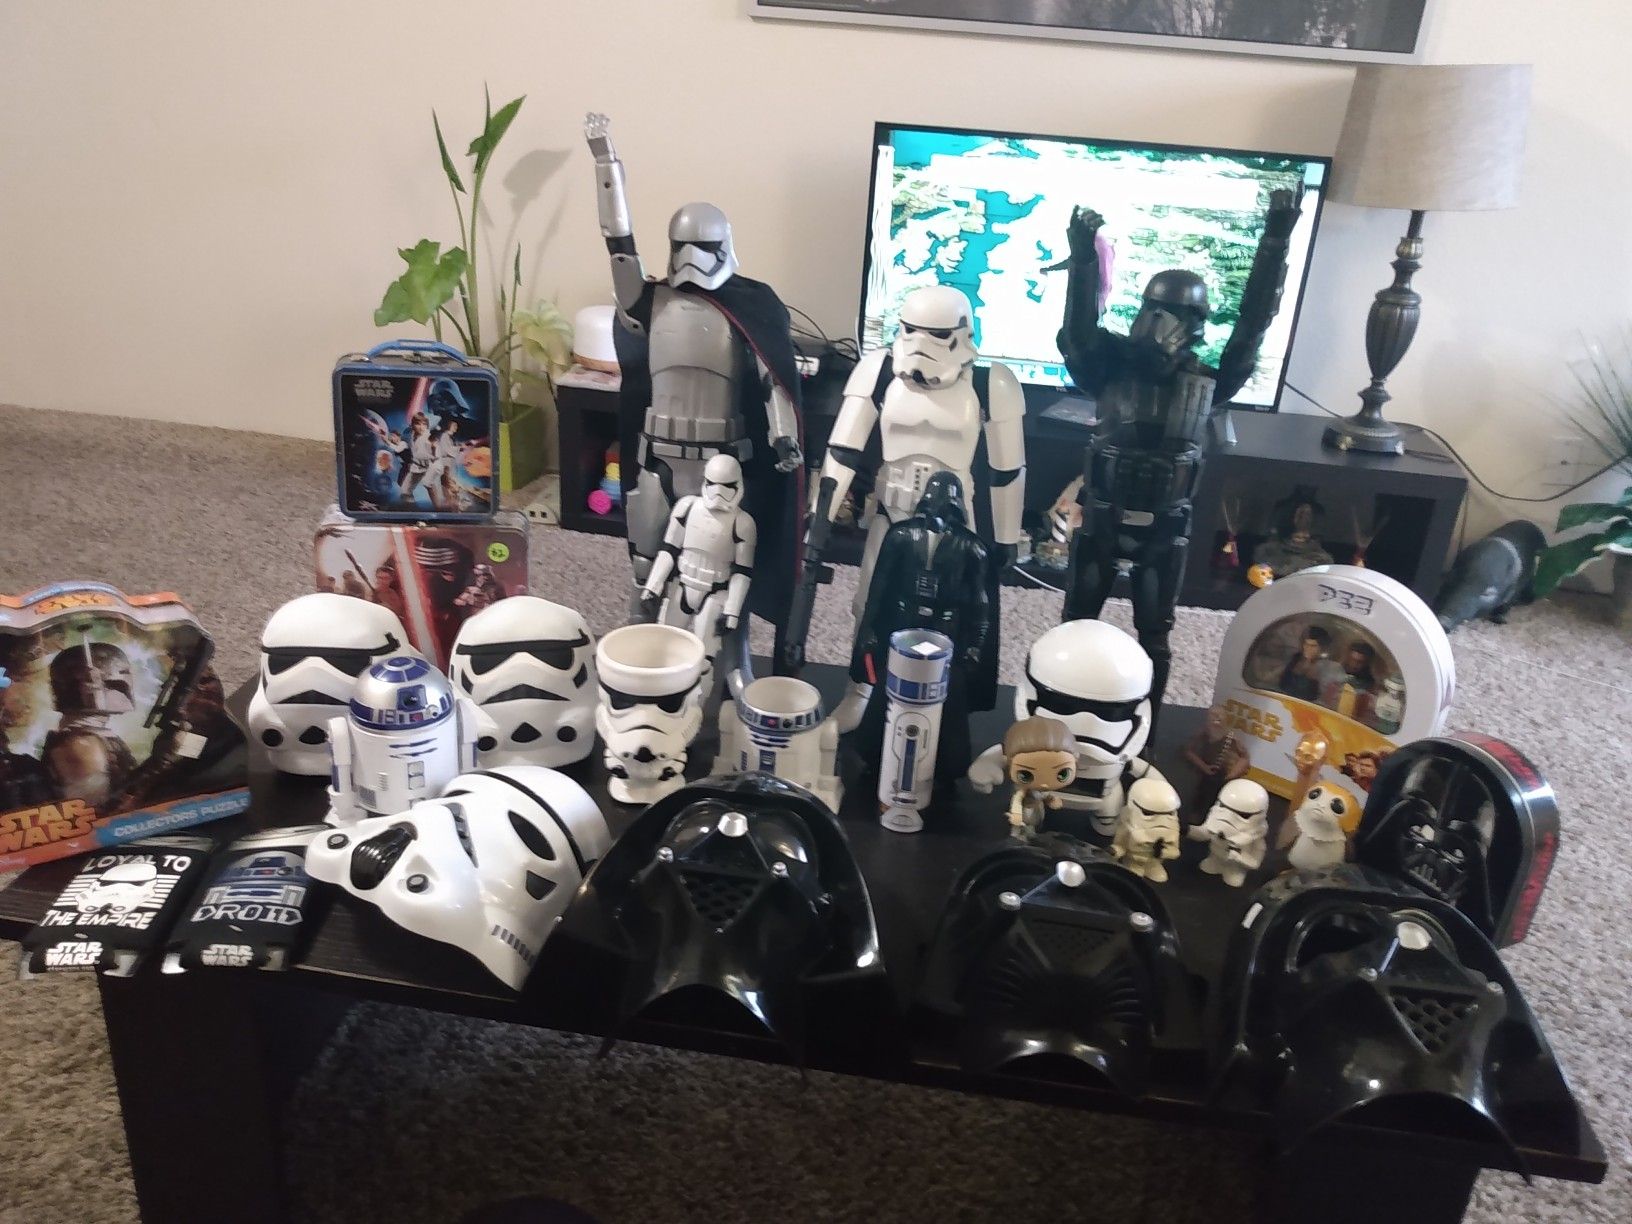 Star wars toy collection